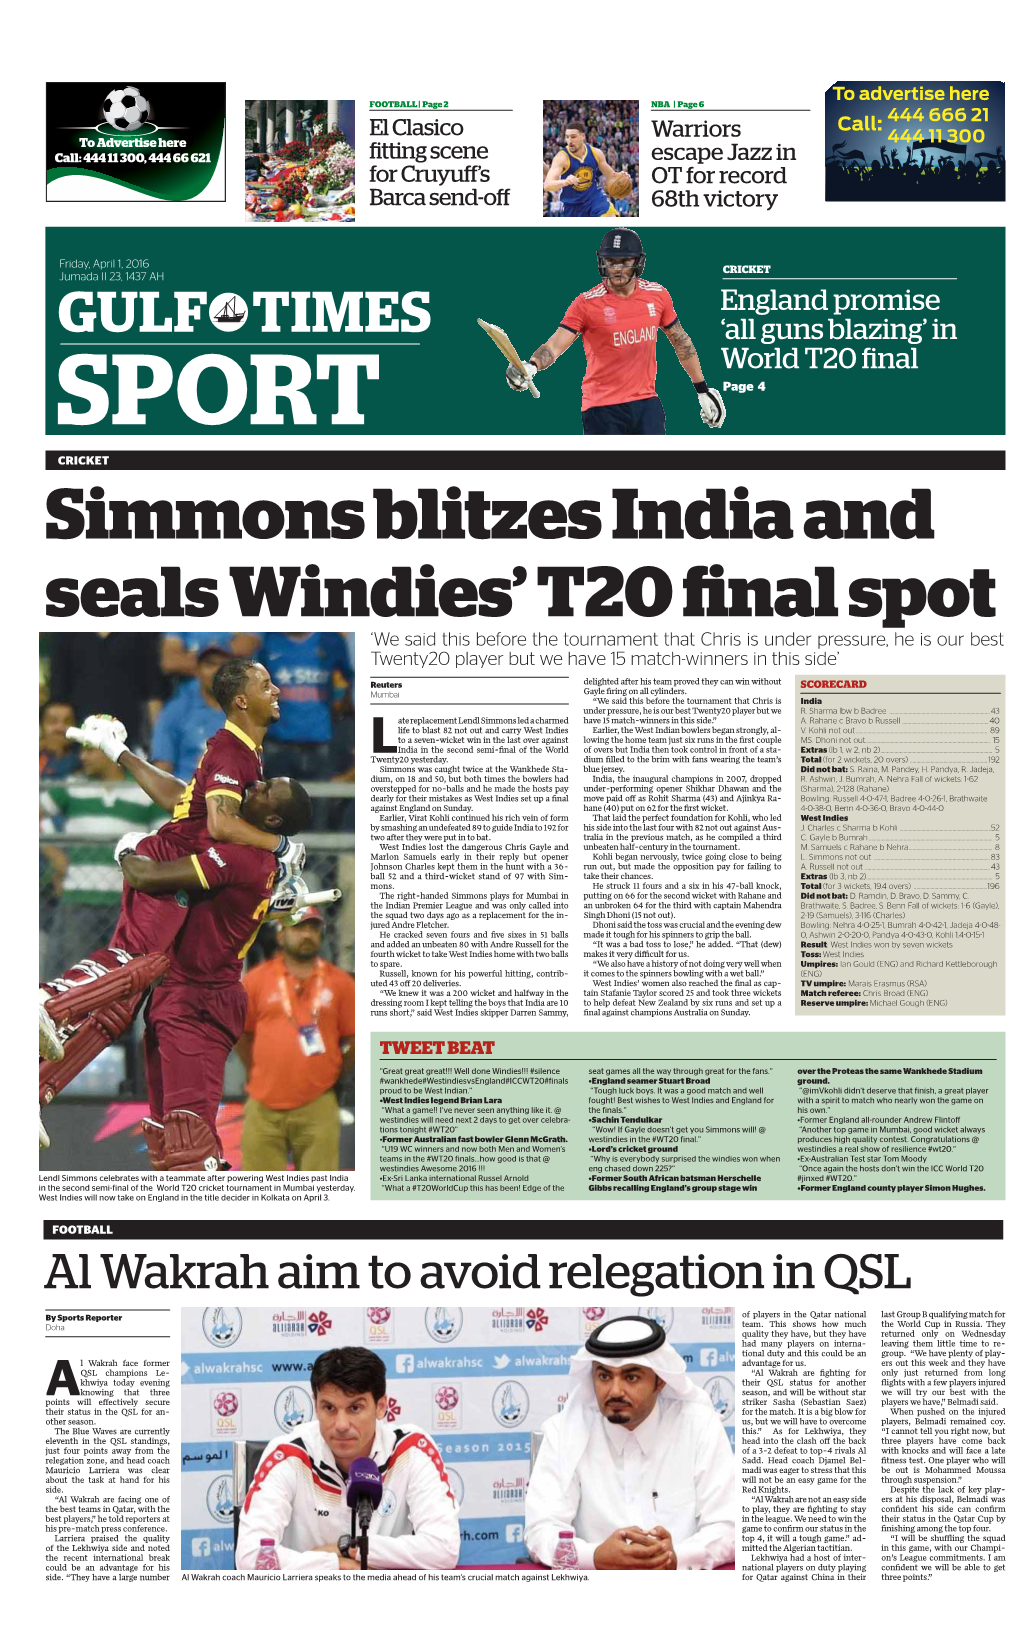 Simmons Blitzes India and Seals Windies' T20 Final Spot